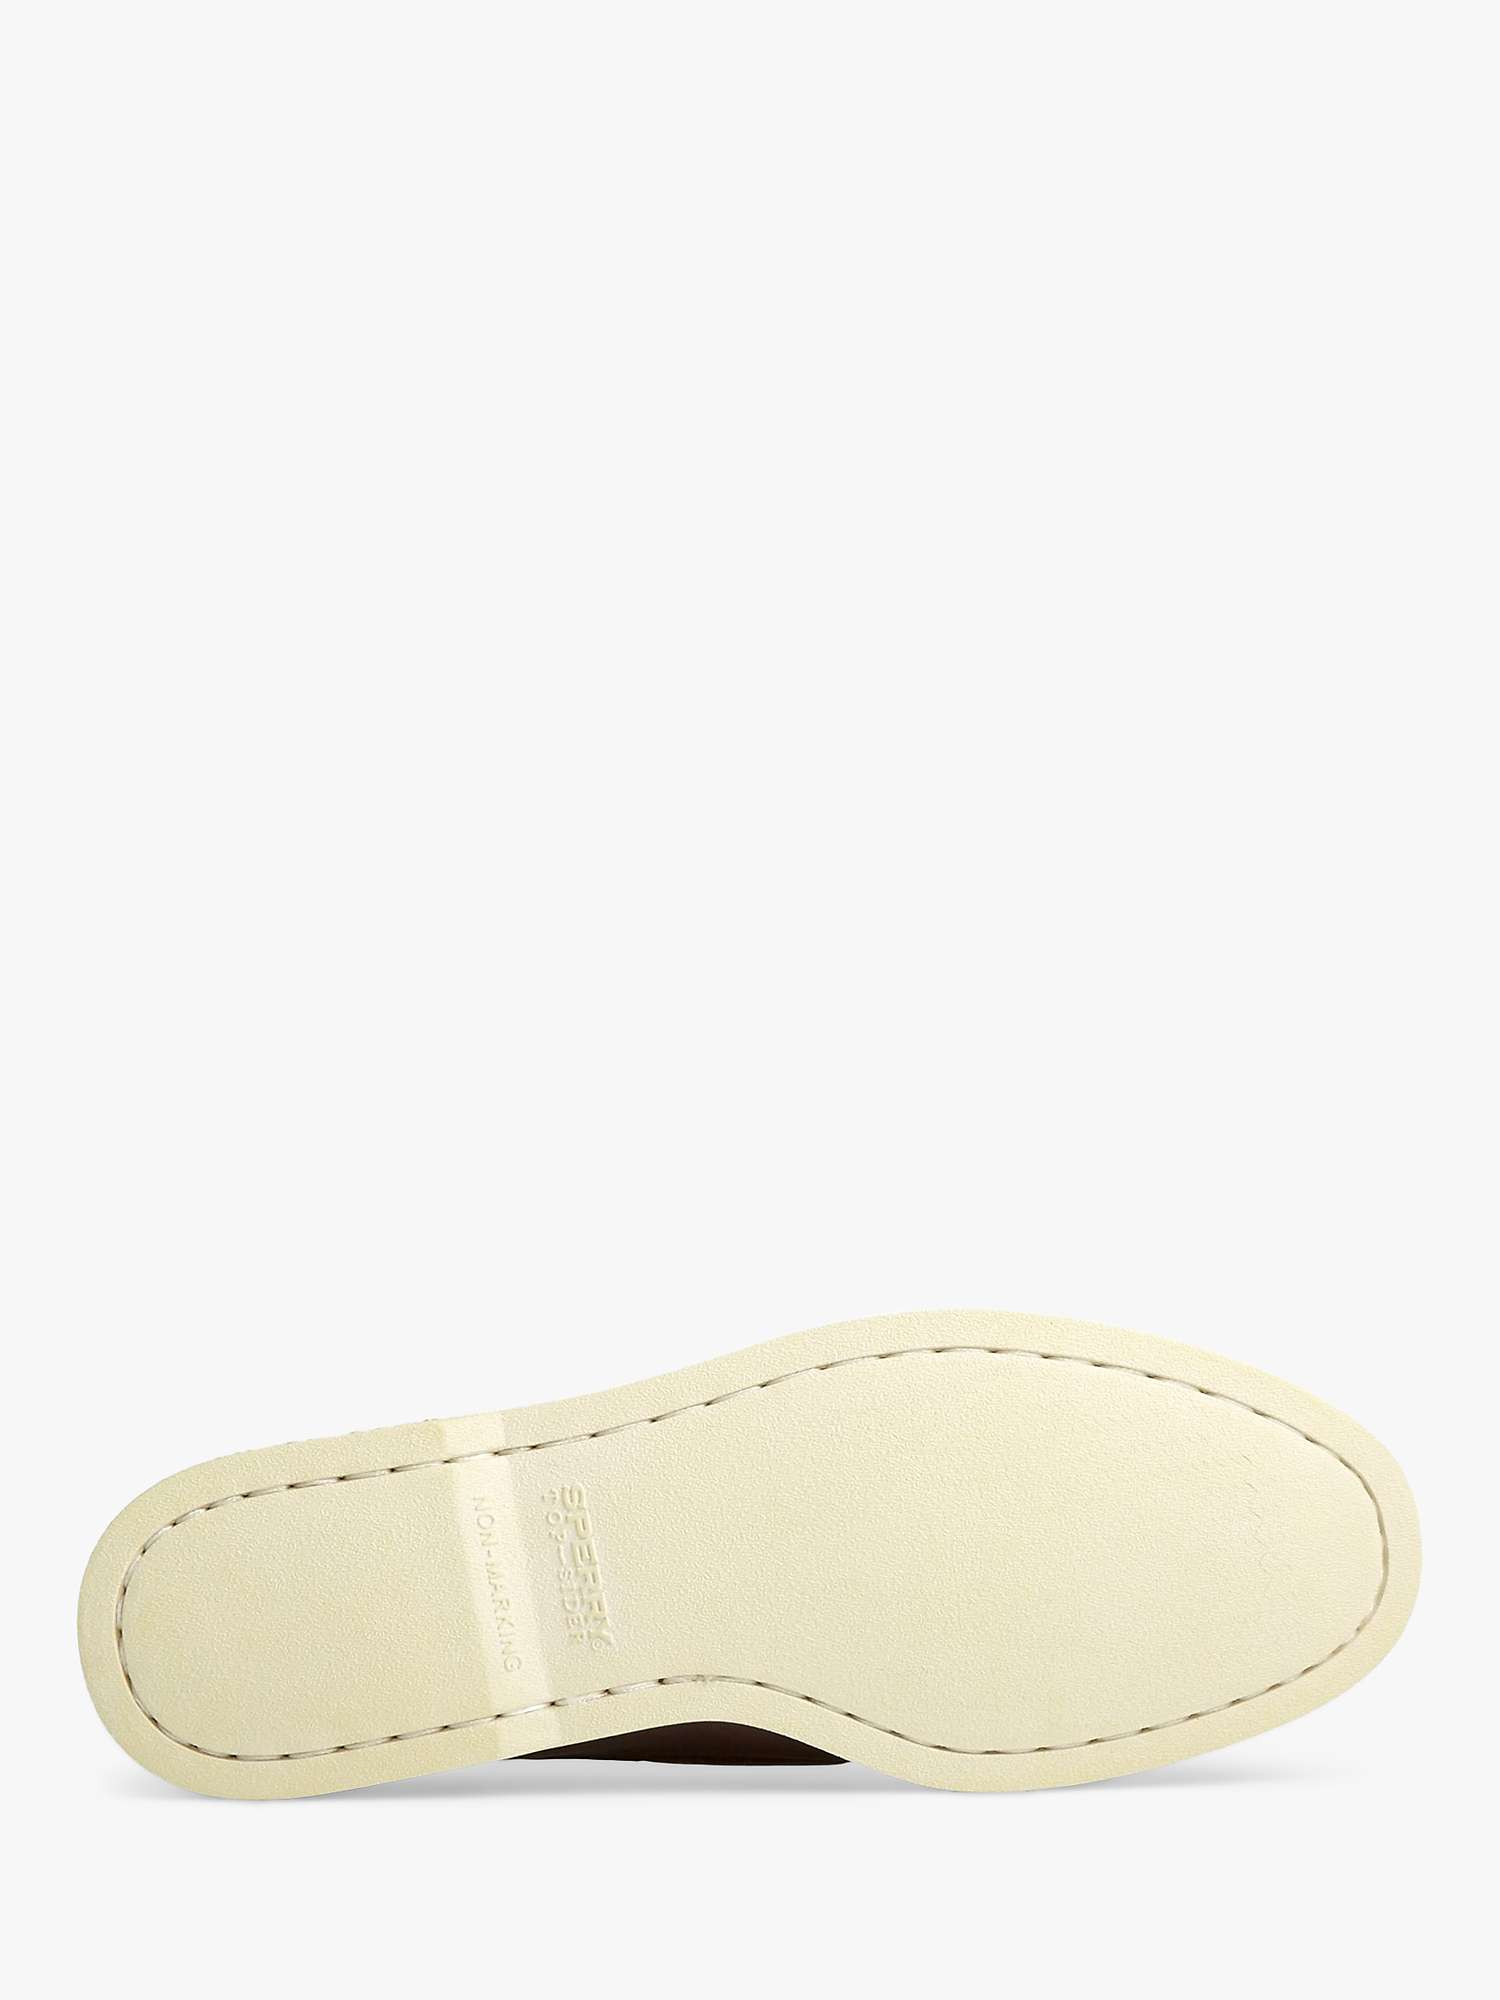 Buy Sperry Authentic Original Leather Boat Shoes Online at johnlewis.com